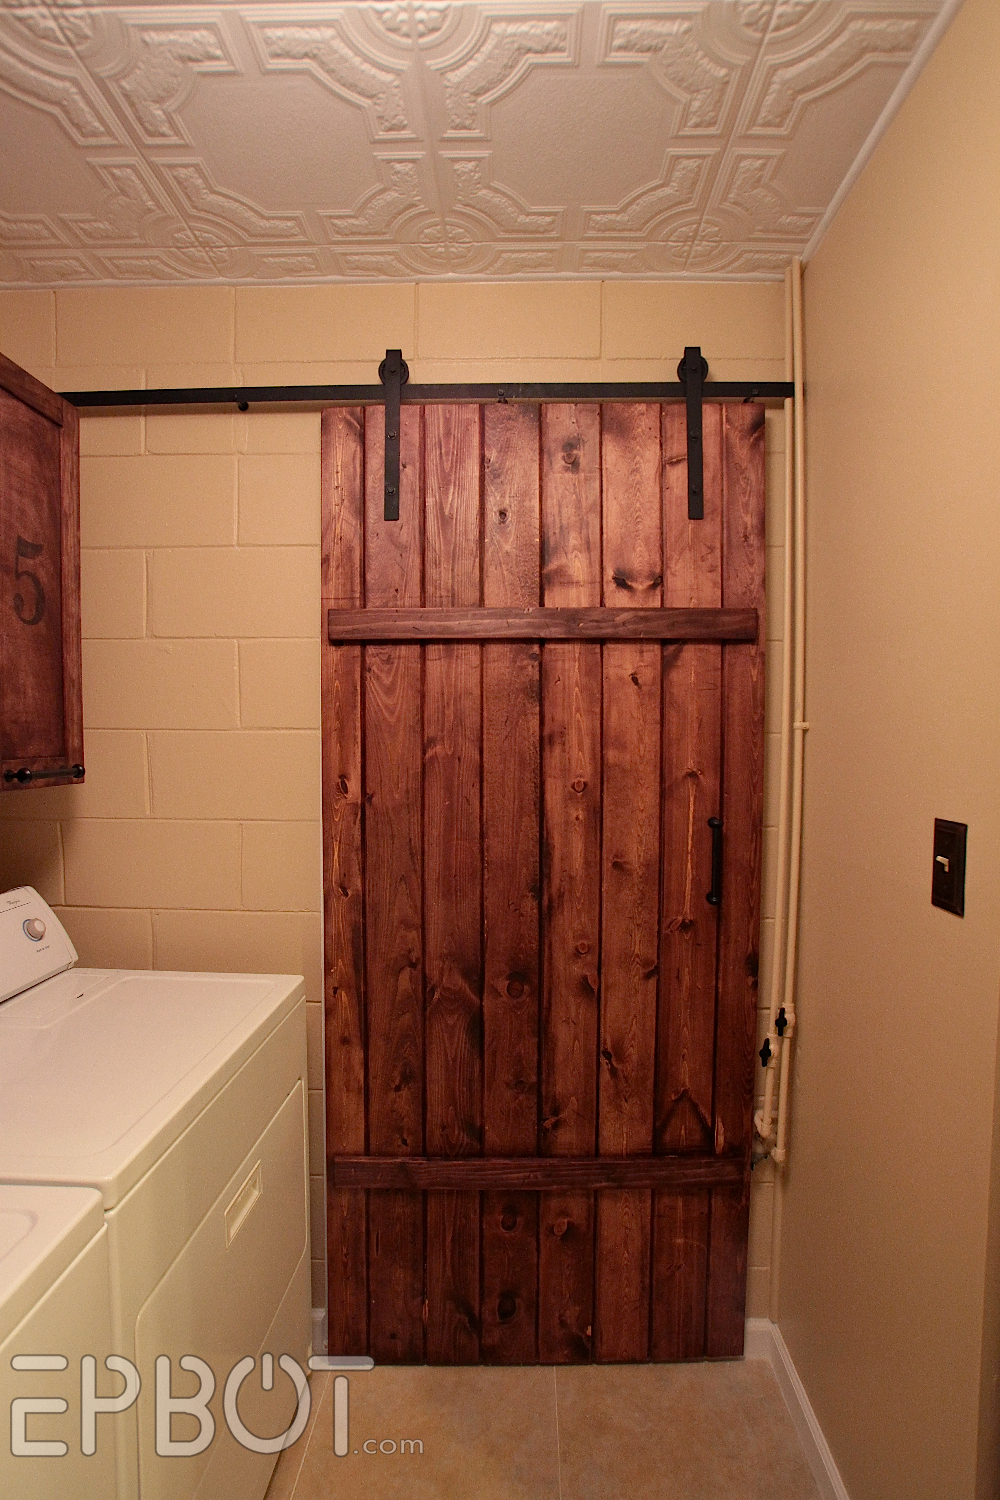 The total cost for this door - wood and hardware combined - was less 